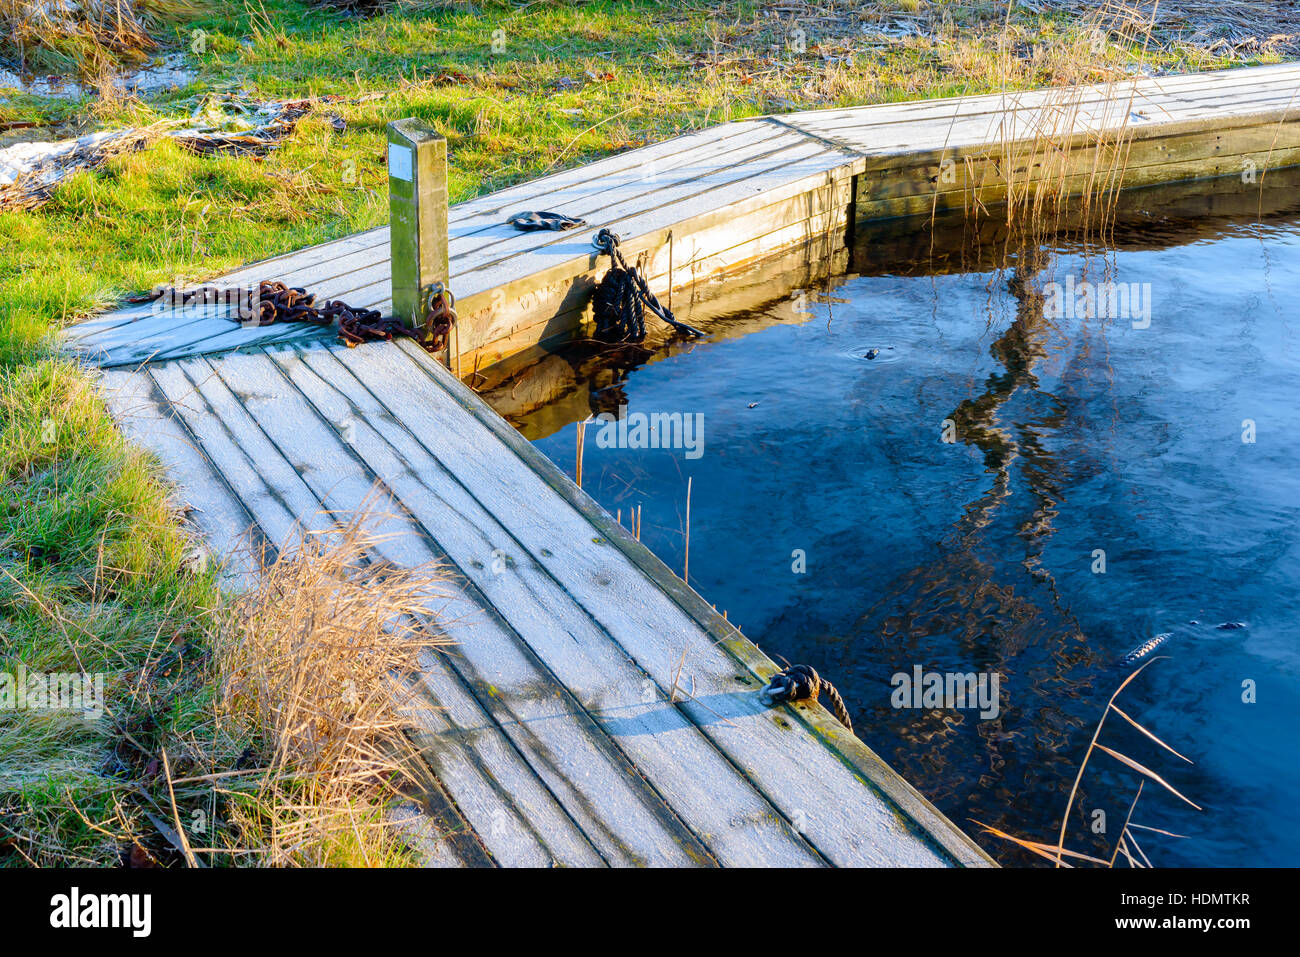 Narrow and small wooden pier covered in frost. Chain and rope at the pier but no boat. Chilly winter morning with calm water. Stock Photo